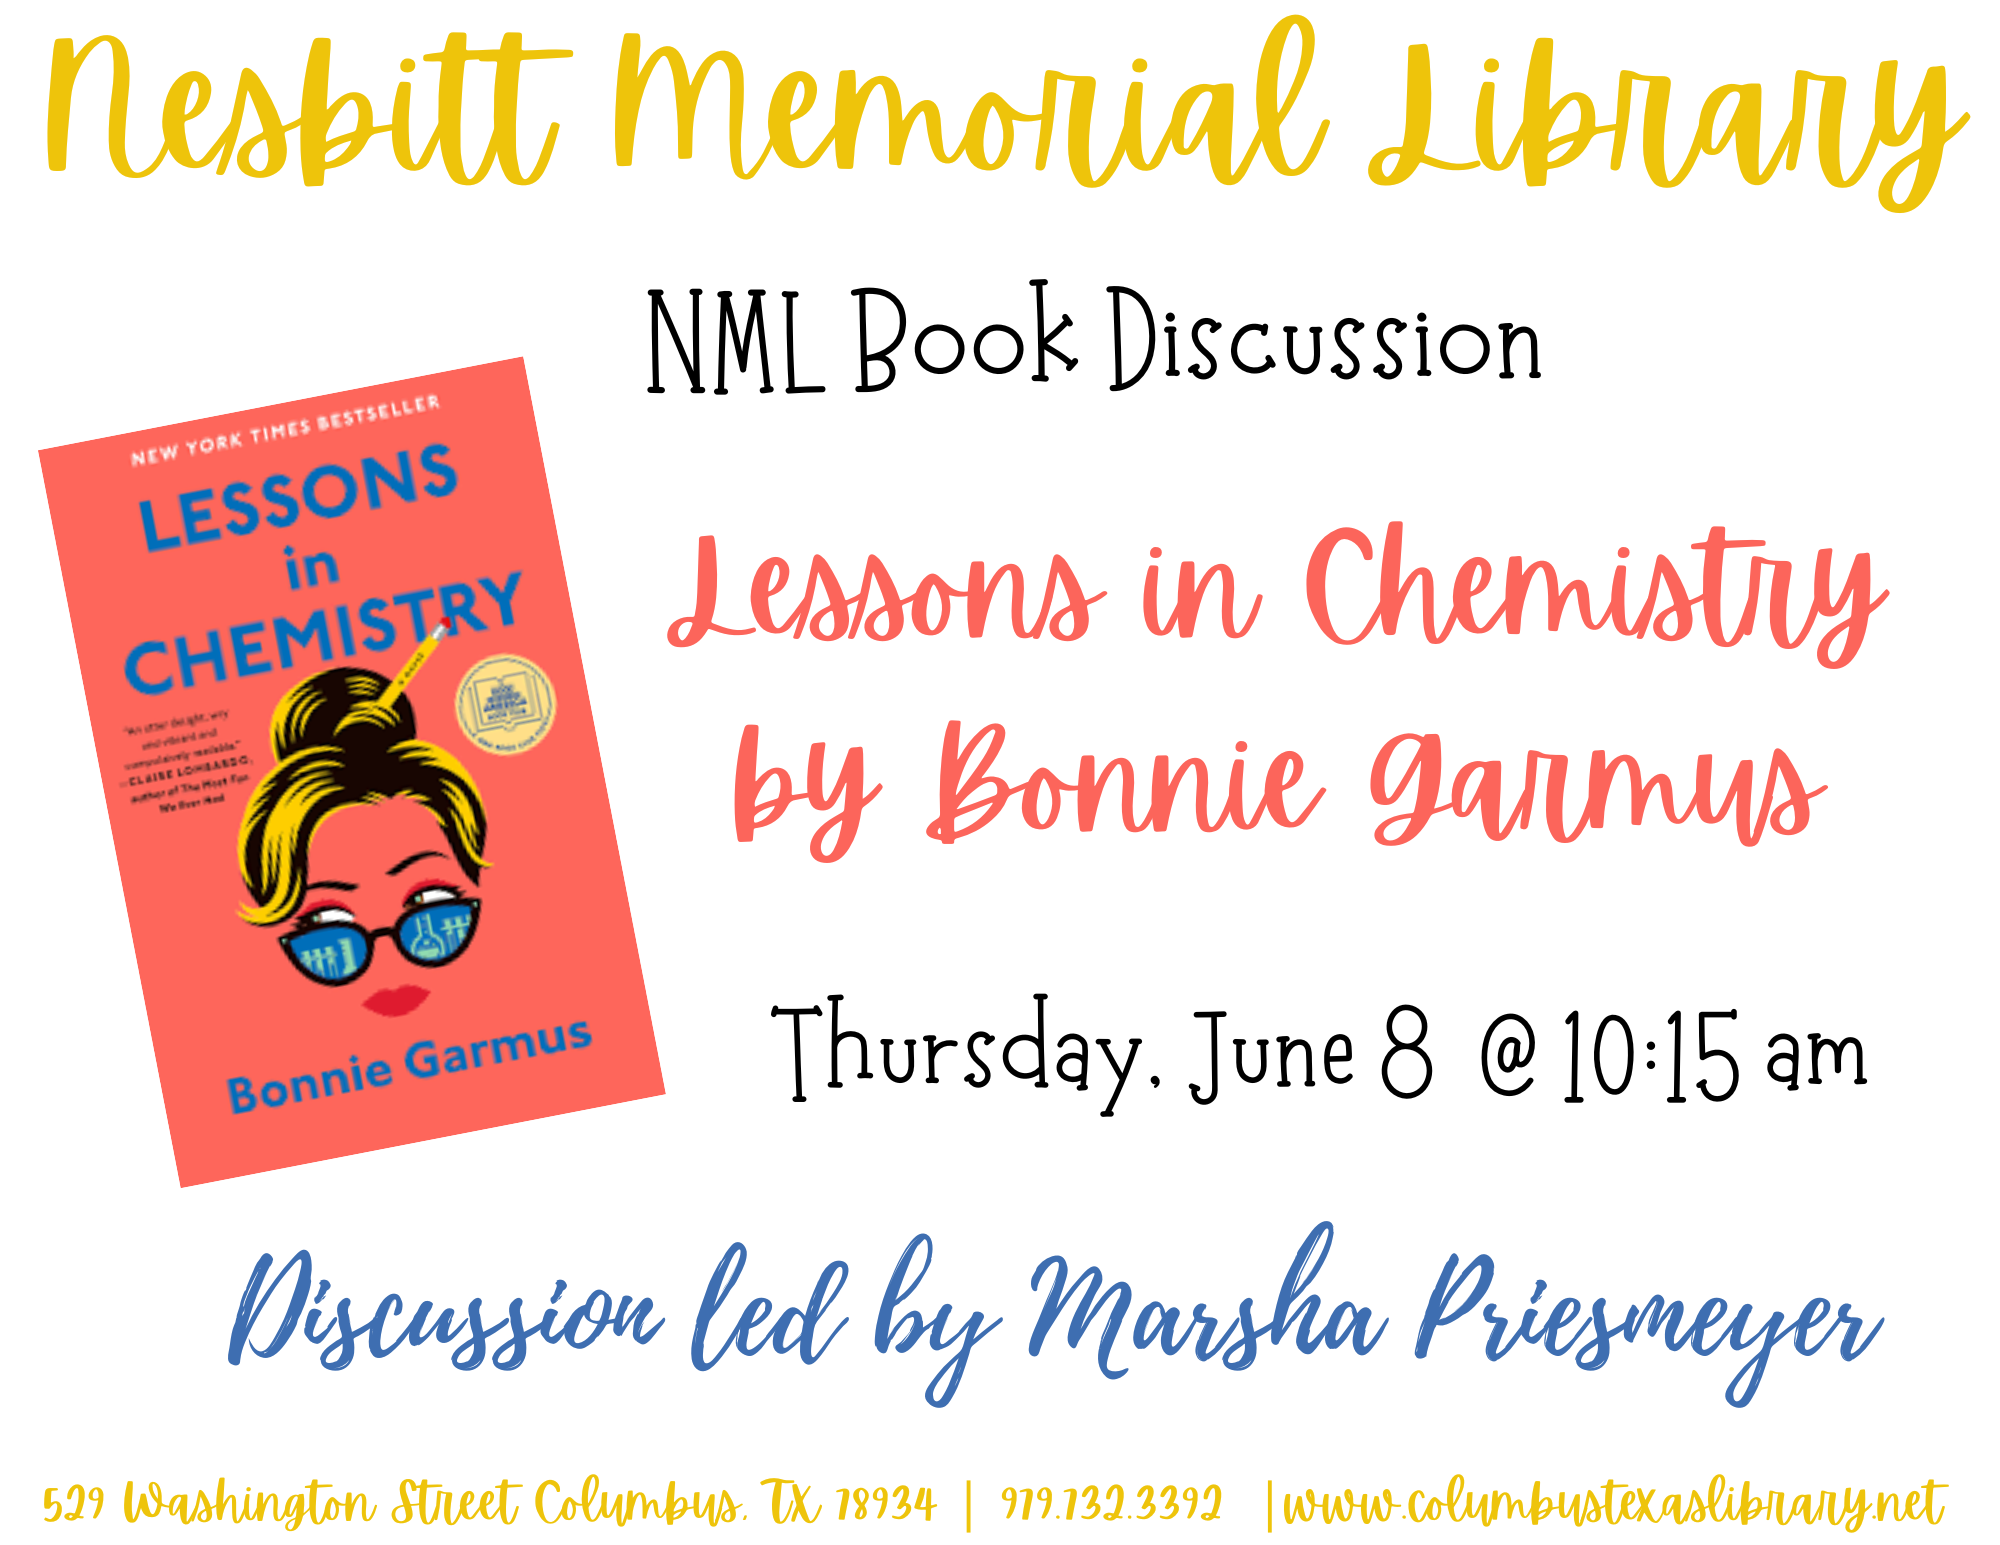  NML Book Discussions Jun 8th at 10:15am